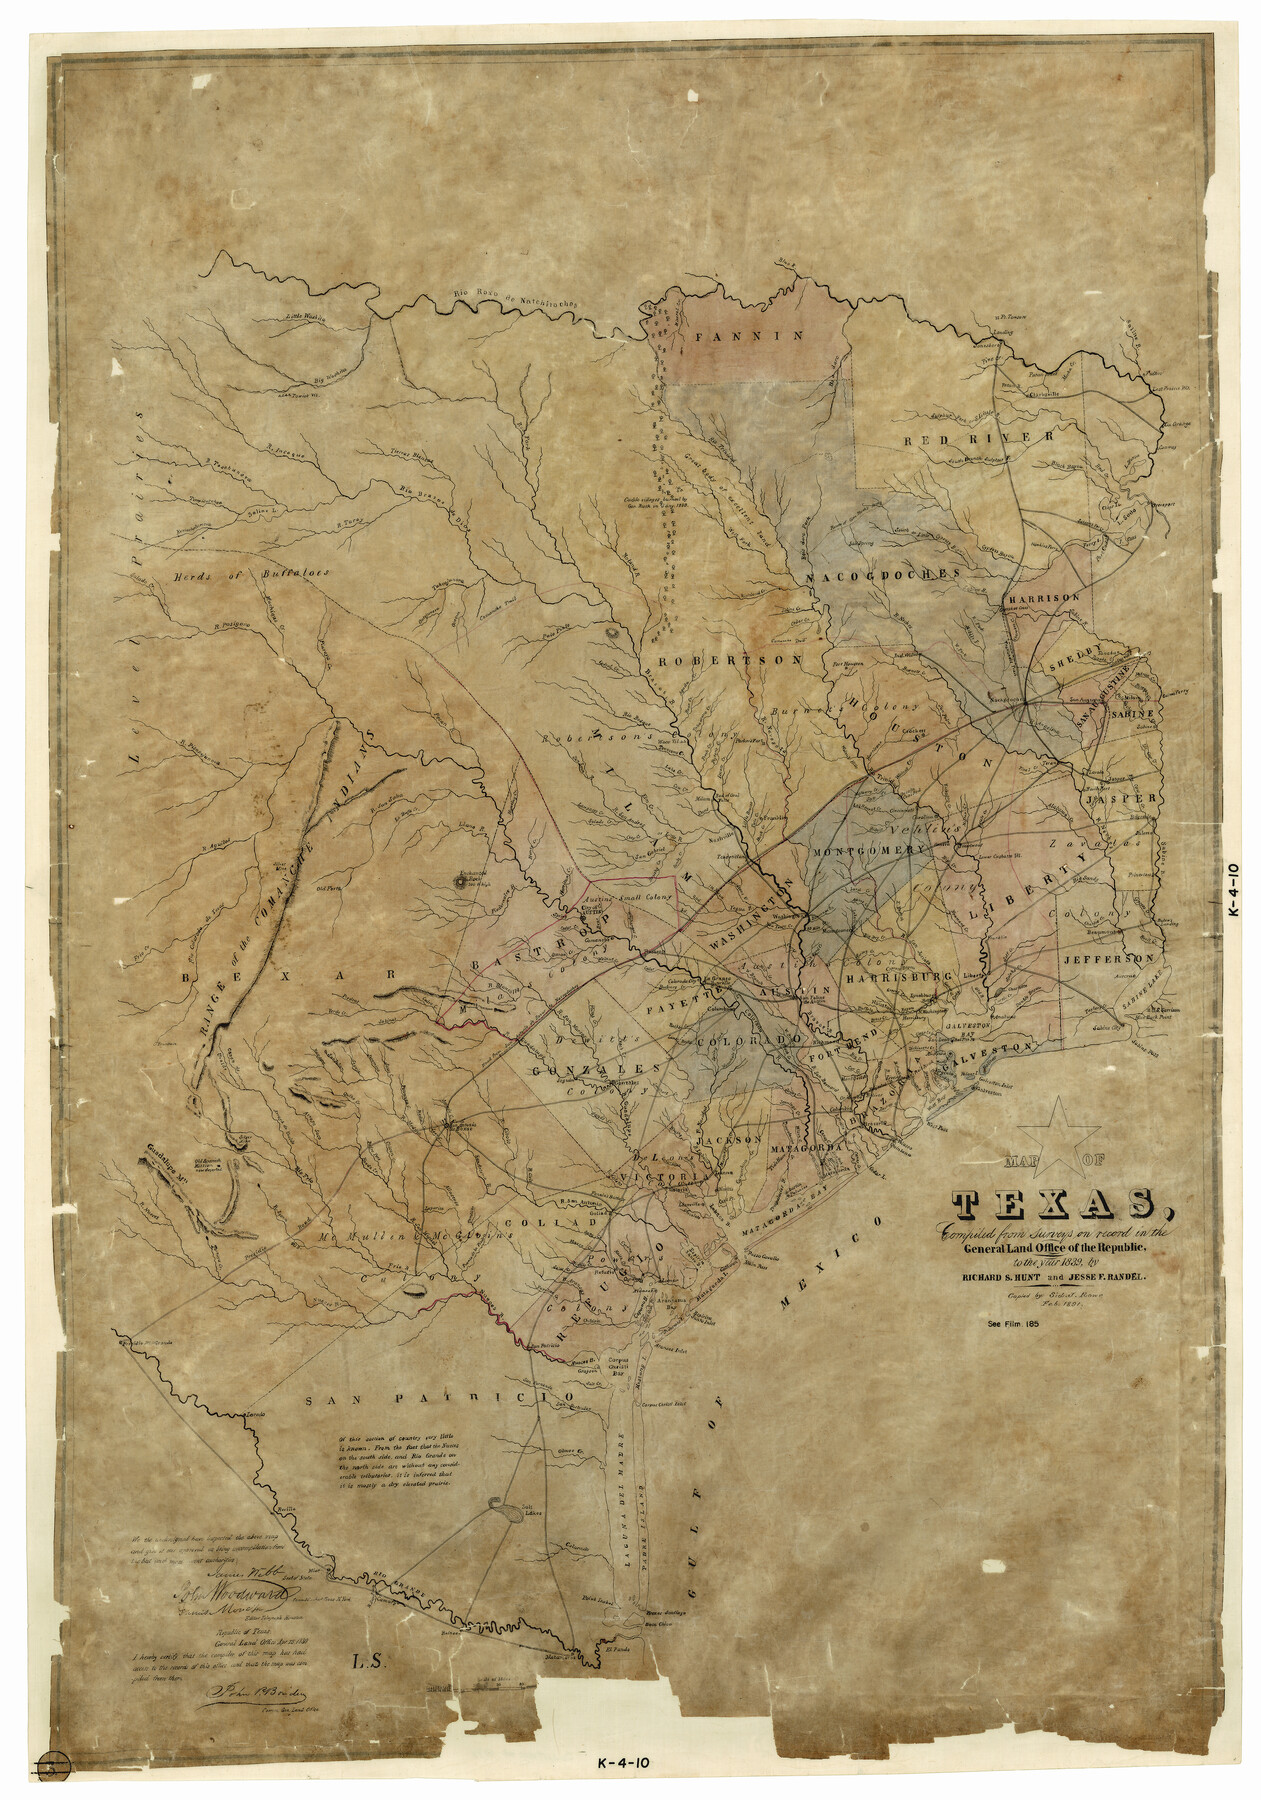 Map of Texas Compiled from surveys on record in the General Land Office of the Republic to the year 1839